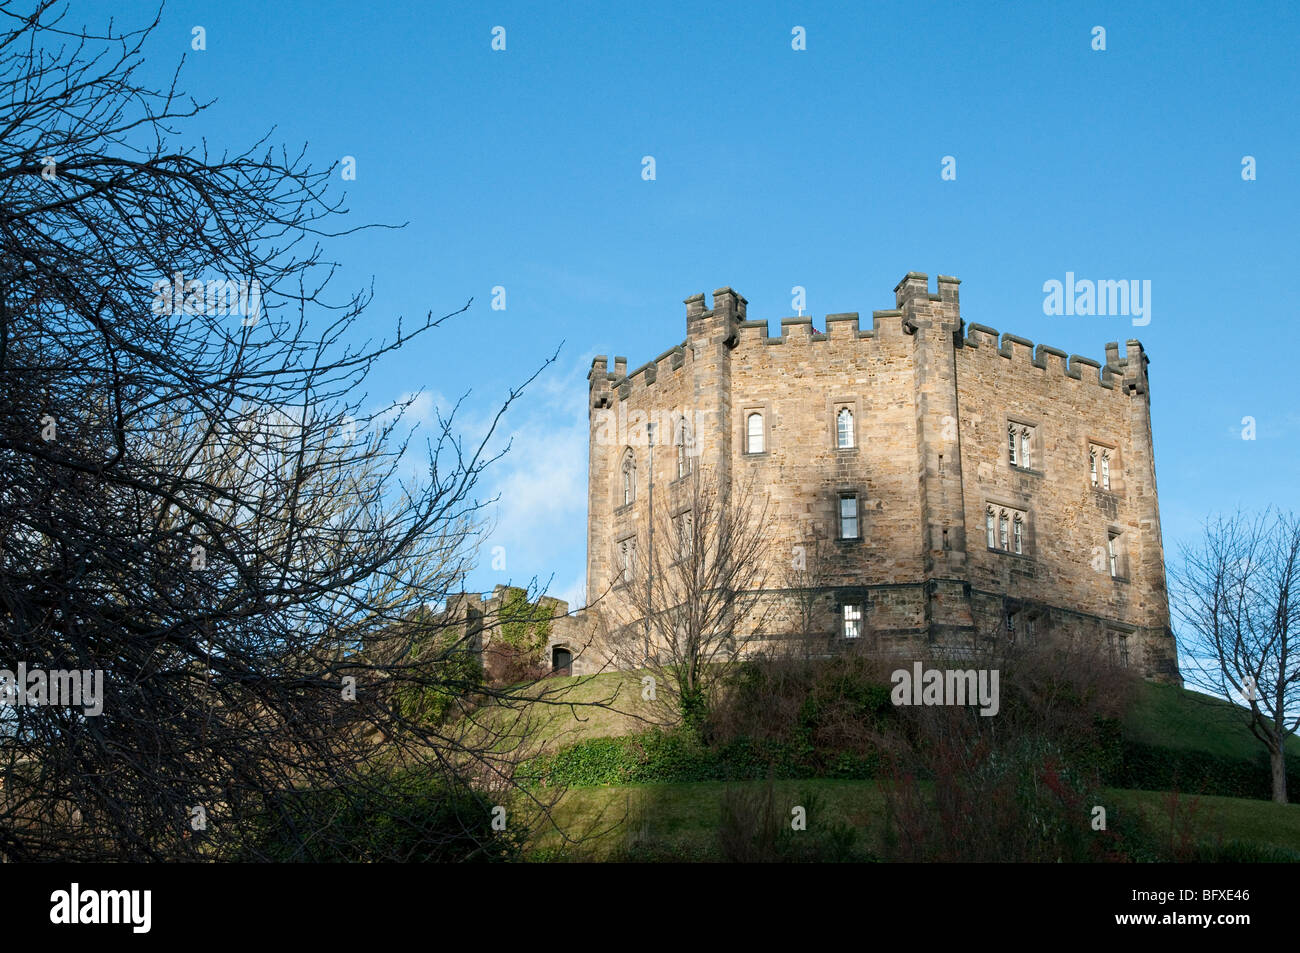 Durham castle, home of University College, Durham, with tree in foreground and blue sky background. Stock Photo